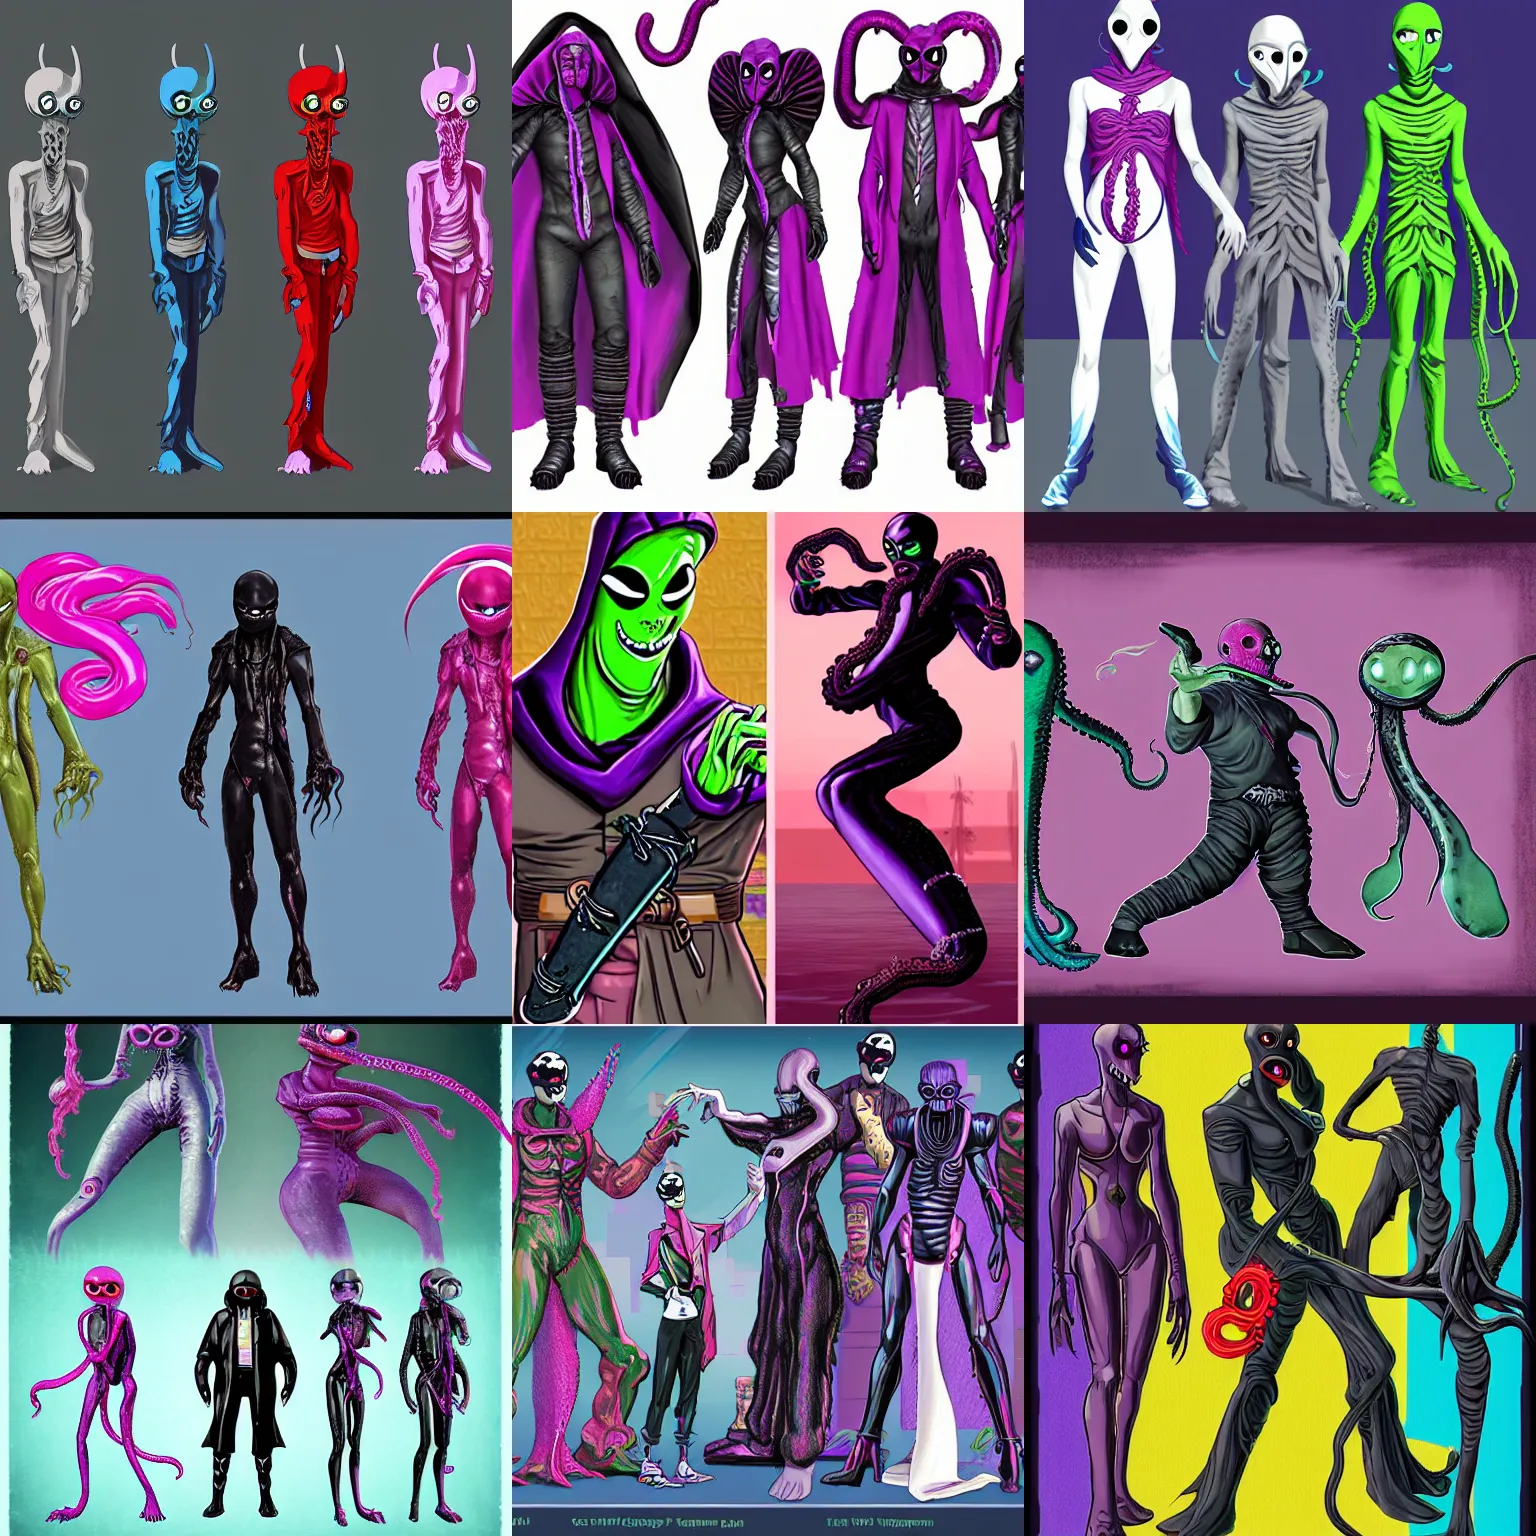 Prompt: a vintage vaporwave vampire colors tall lean vampire aliens with big black alien eyes and a squid beak with three webbed tentacle arms and skinny thin human legs wearing ninja garb based on vampire cloaks as playable characters design sheets that focuses on an ocean setting with help from lead artist Andy Suriano from rise of the teenage mutant ninja turtles on nickelodeon using artistic cues for the game fret nice and art direction from the Sony 2018 animated film spiderverse